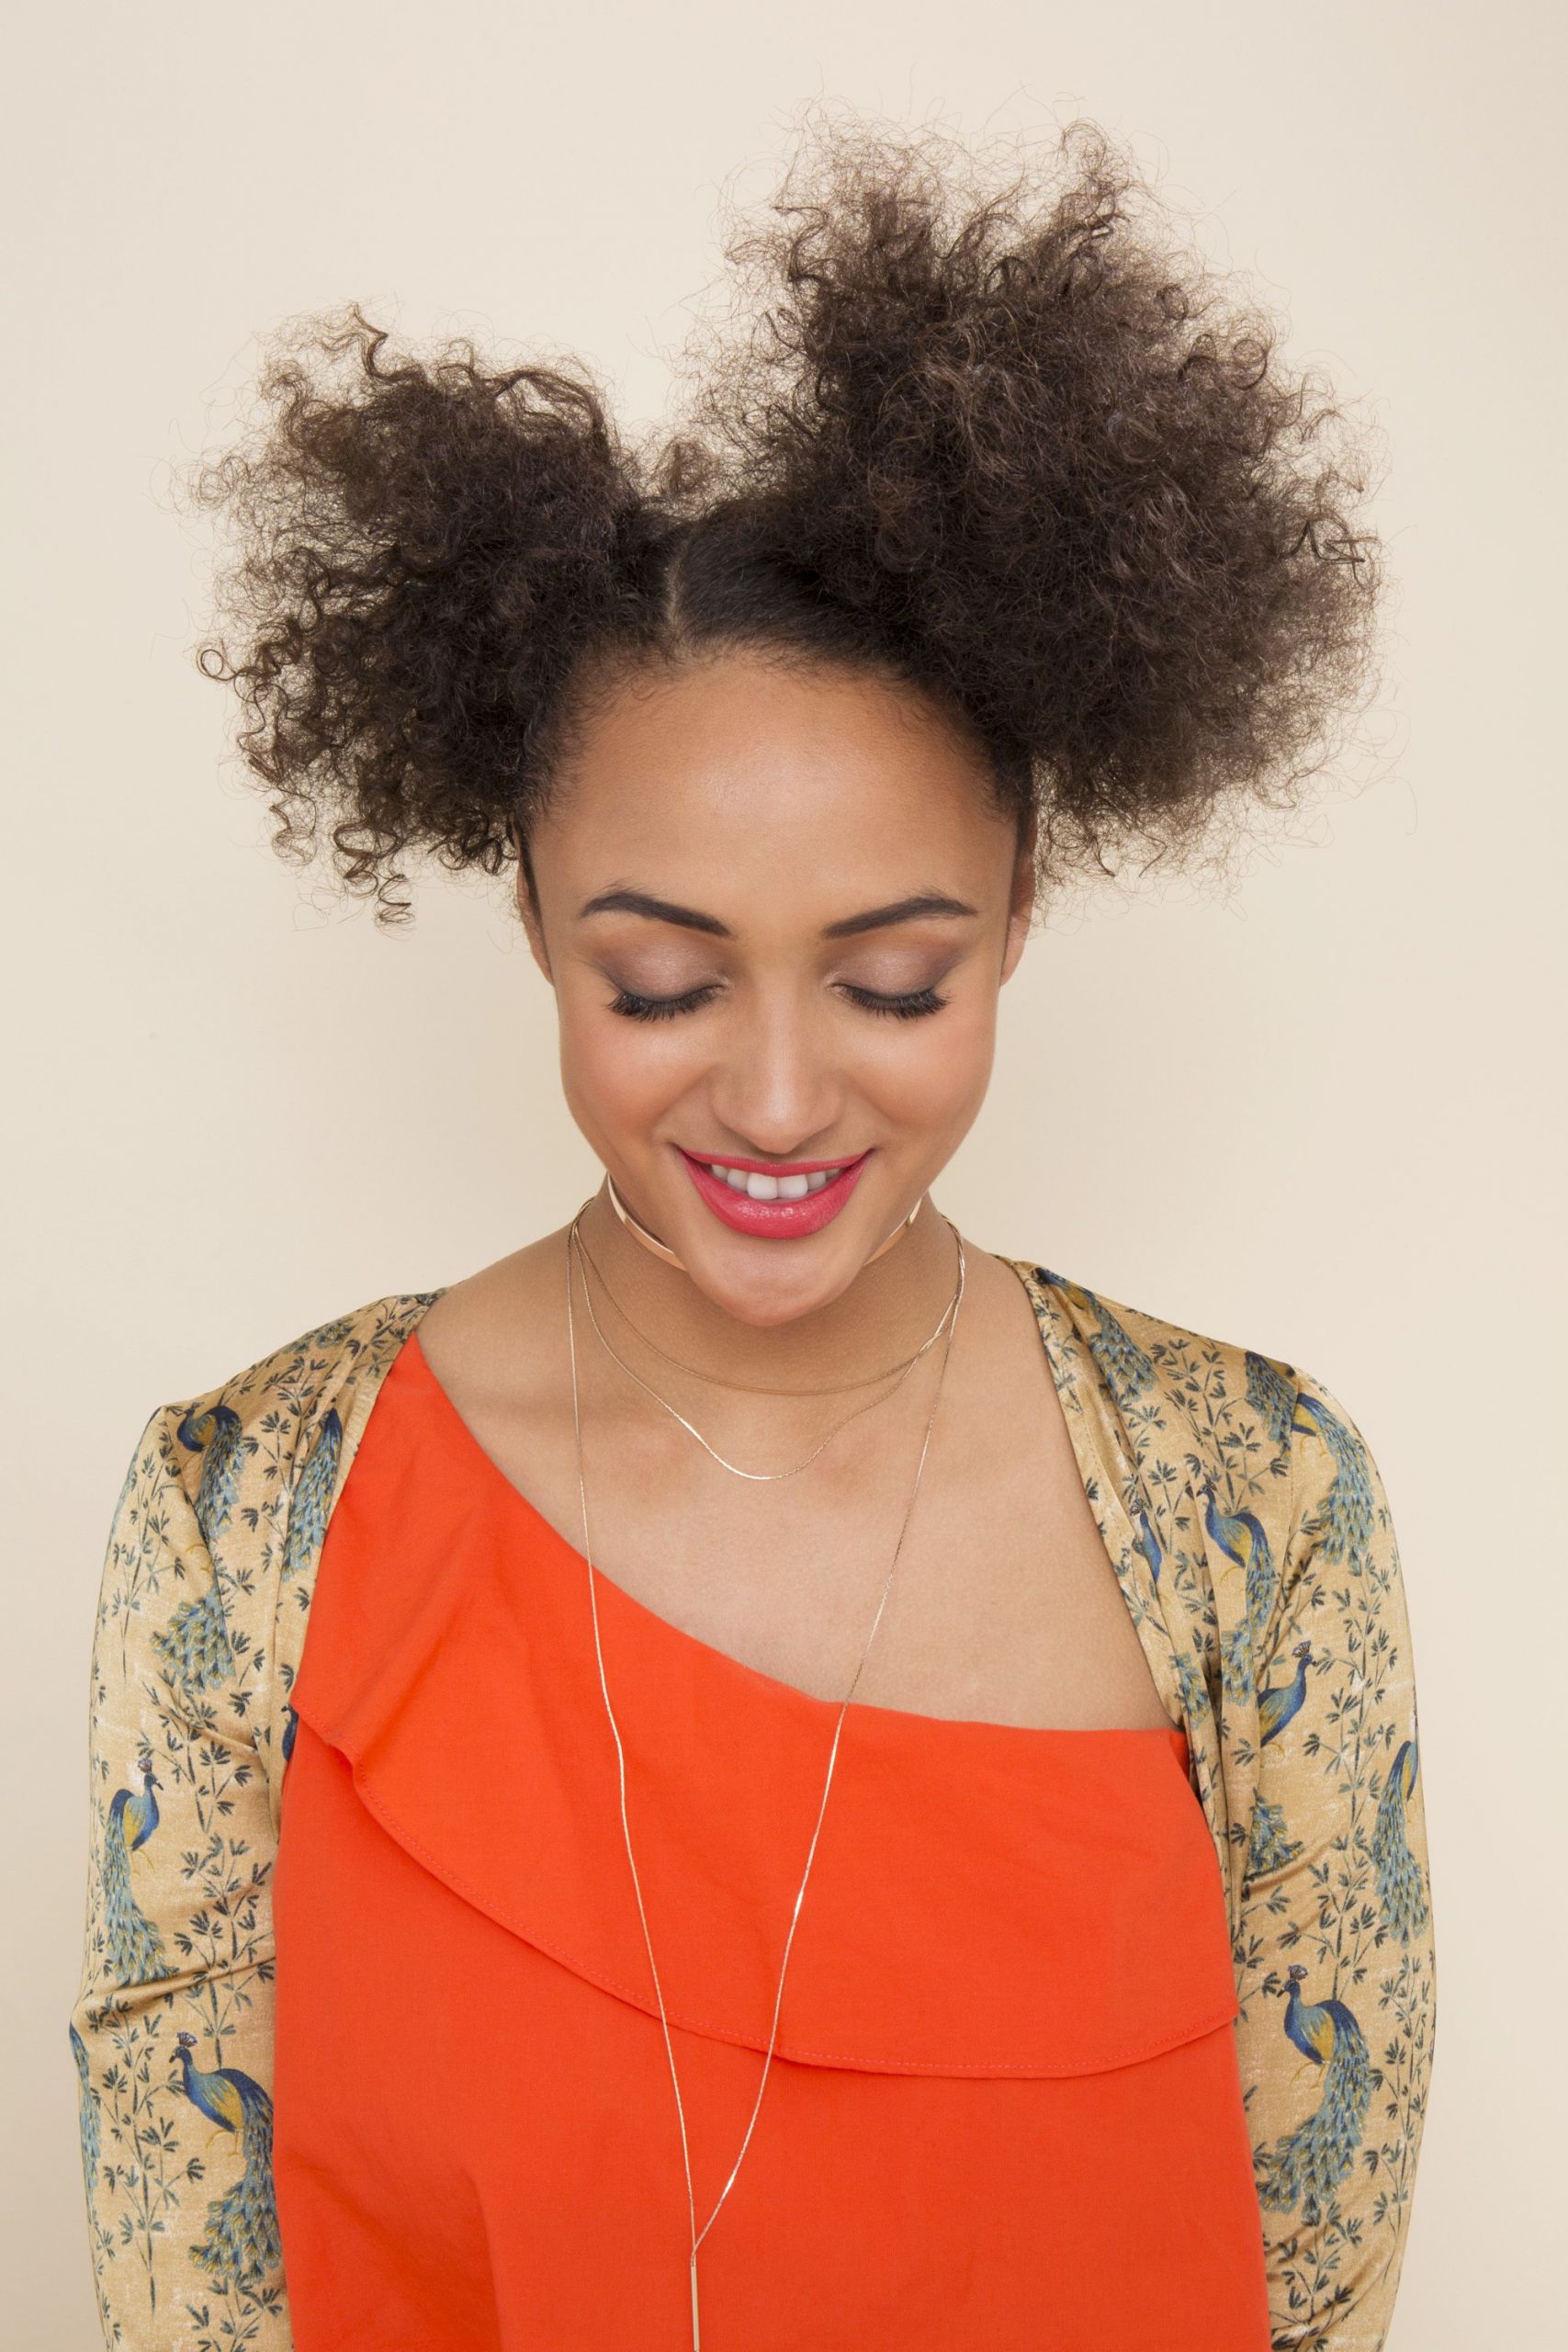 Puff Hairstyles For Natural Hair
 Space Puff Hairstyle How to Create this Cool Look on